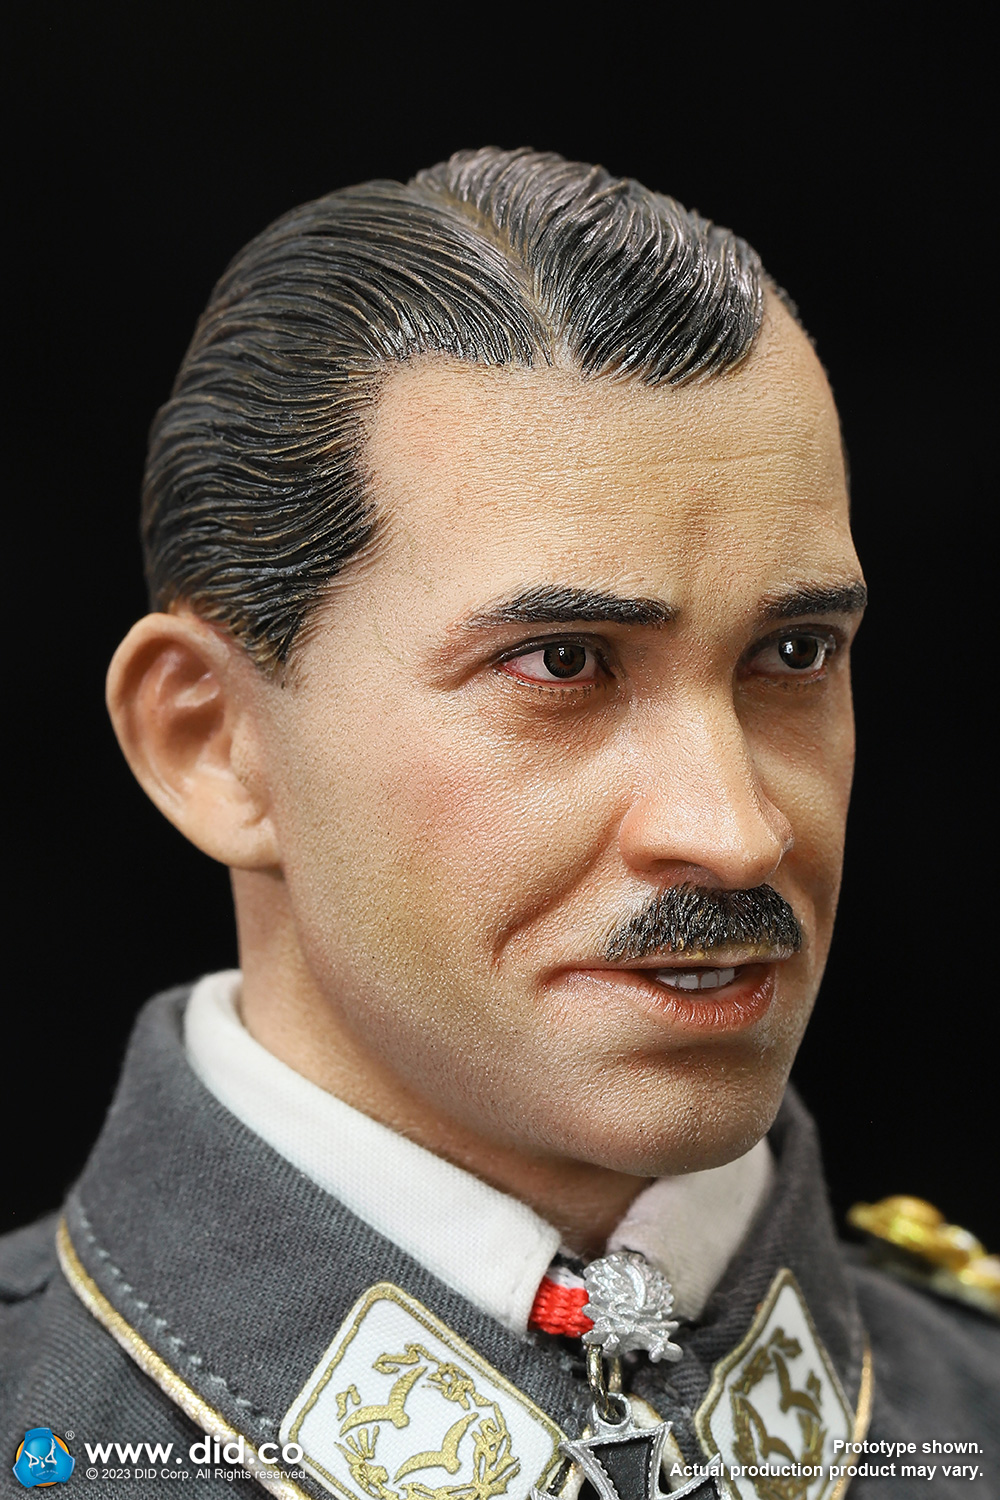 newproduct - NEW PRODUCT: DiD: D80165 WWII German Luftwaffe Ace Pilot – Adolf Galland 1133